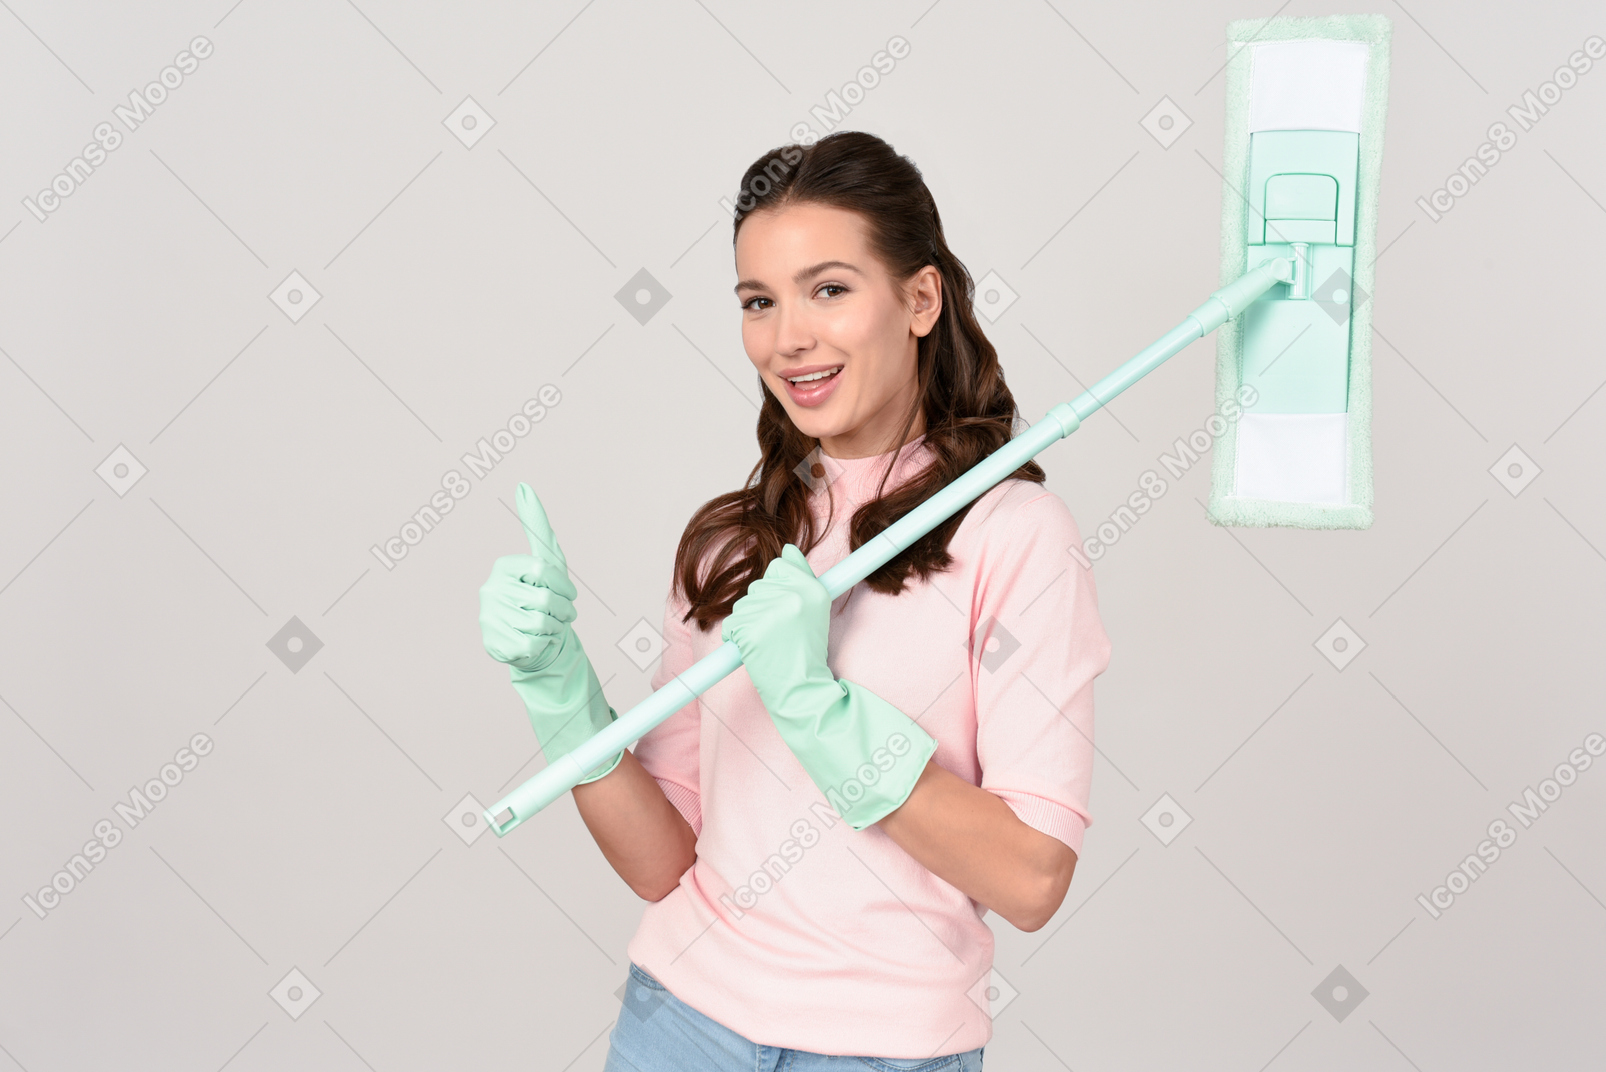 Attractive young woman with a mop showing thumbs up